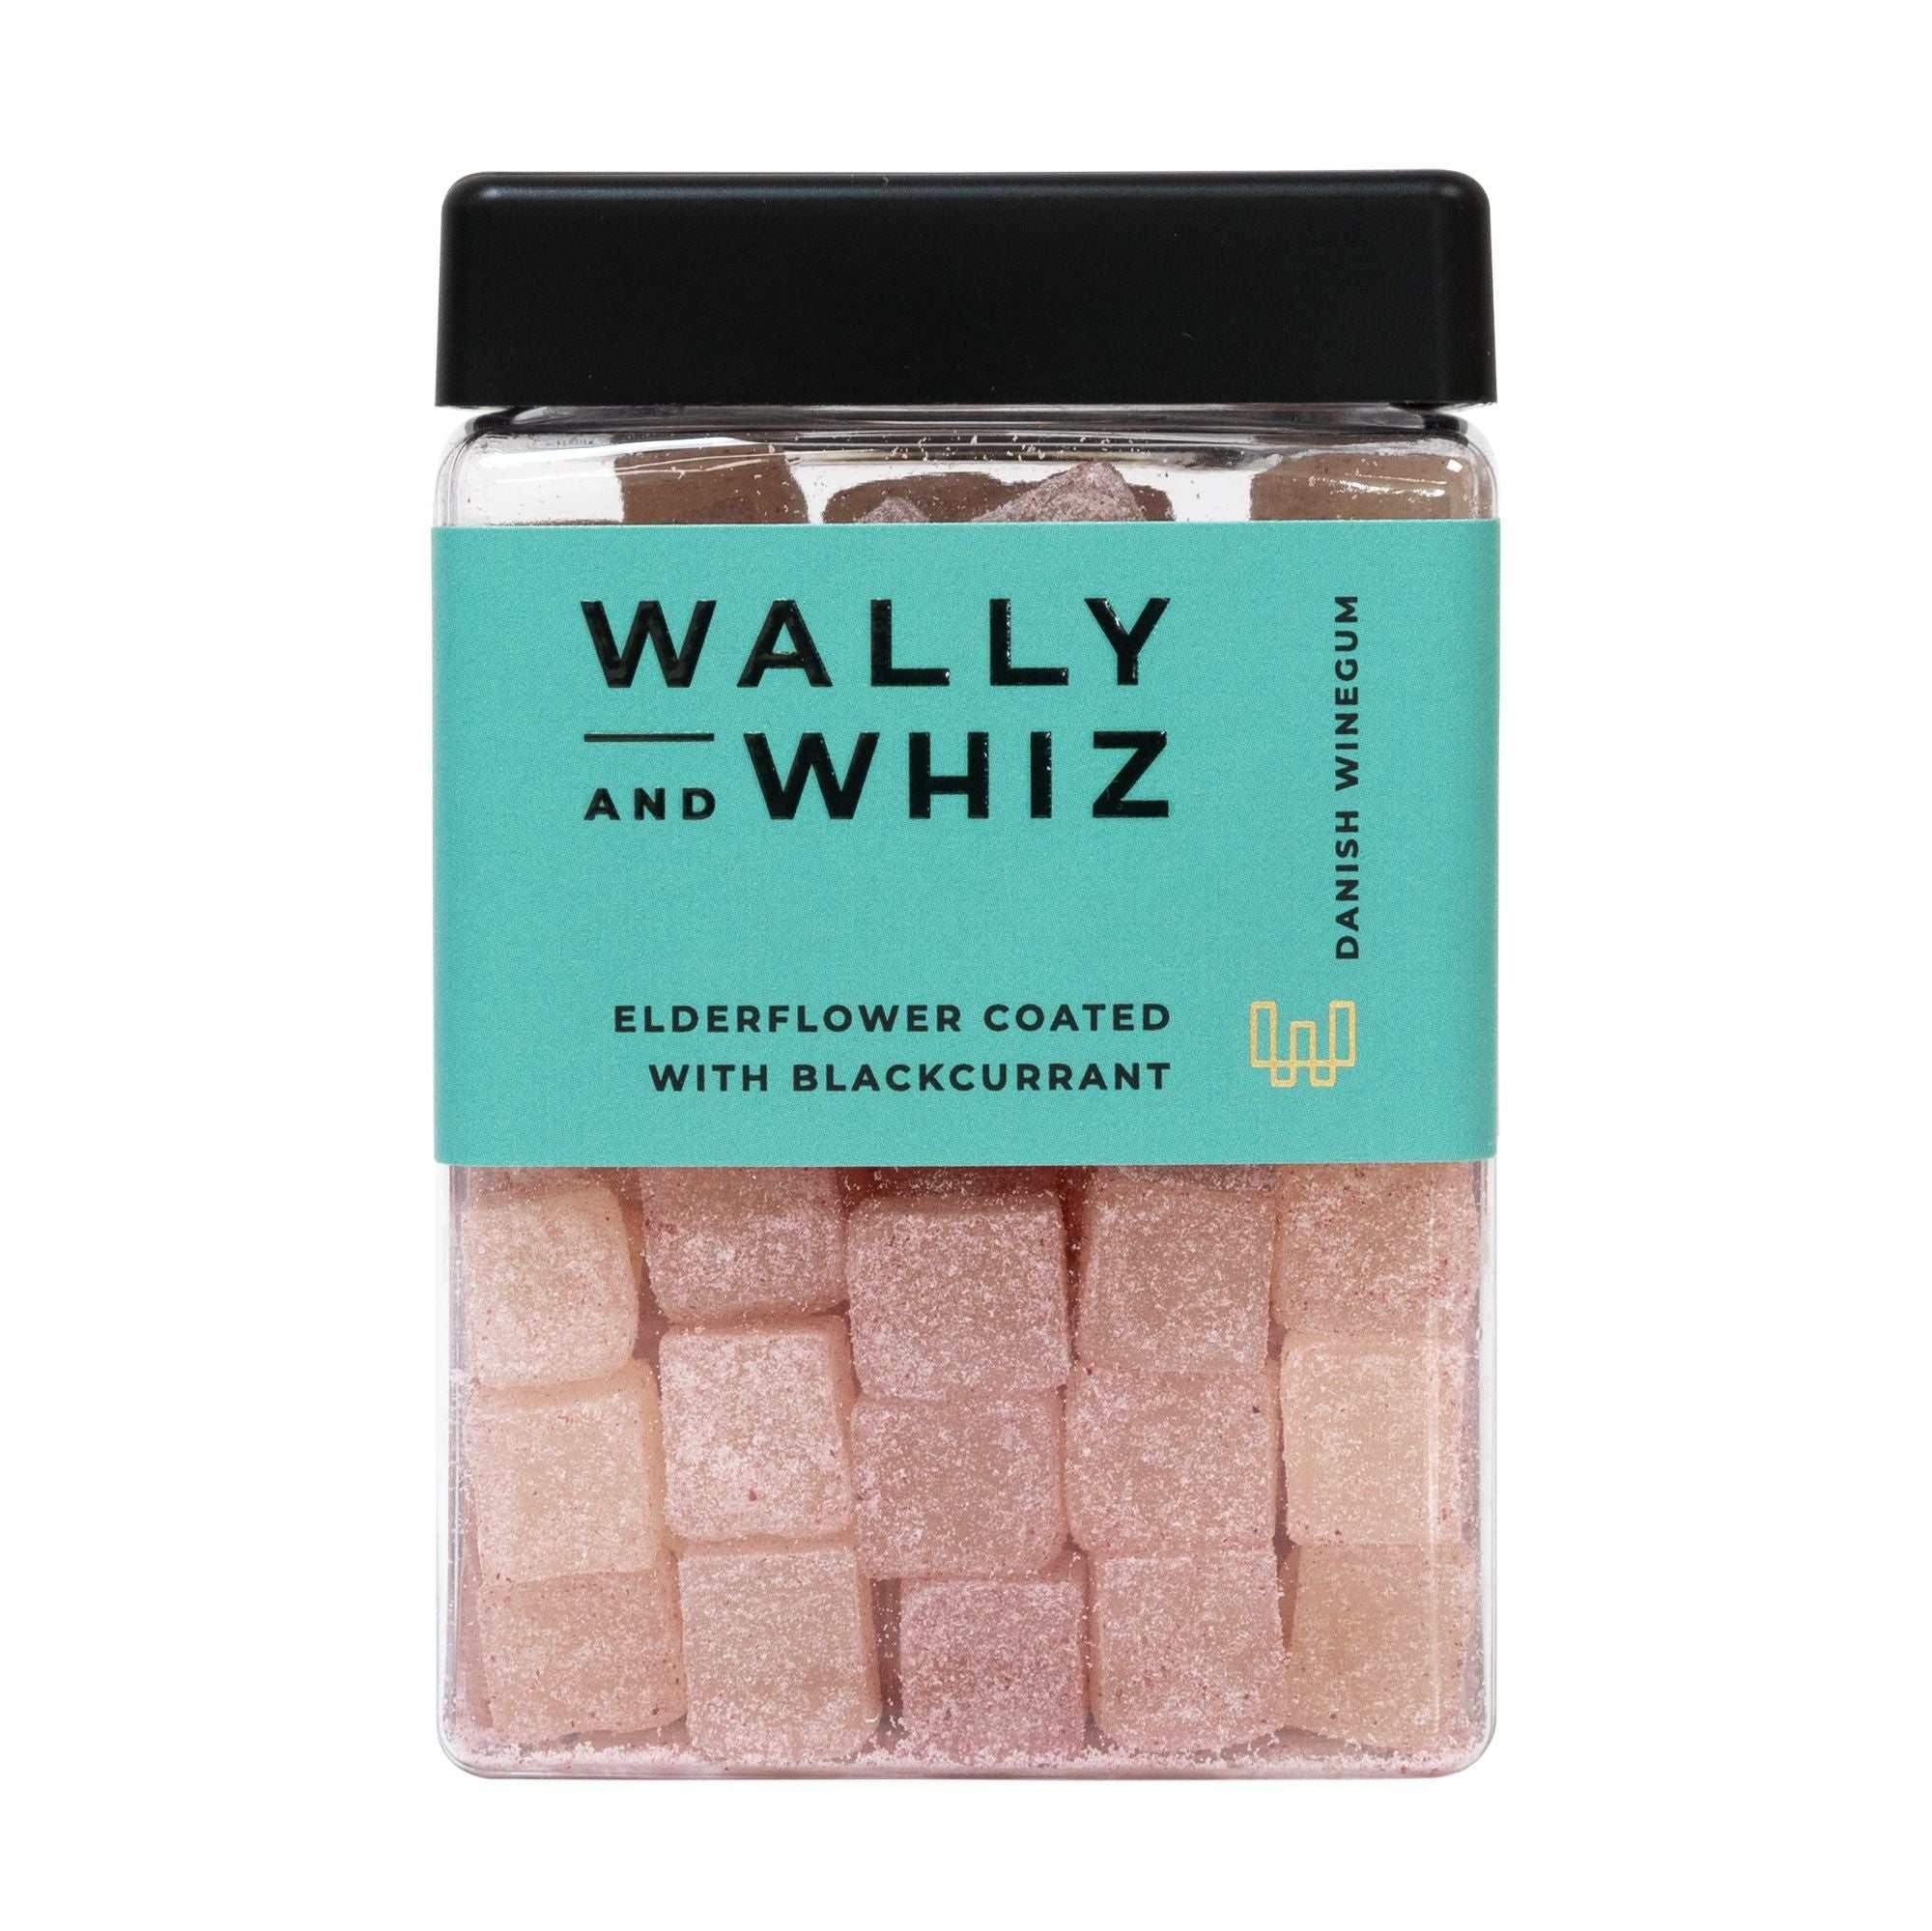 Wally And Whiz The Summer Box Elderflower With Blackcurrant/Strawberry With Vanilla, 480 G